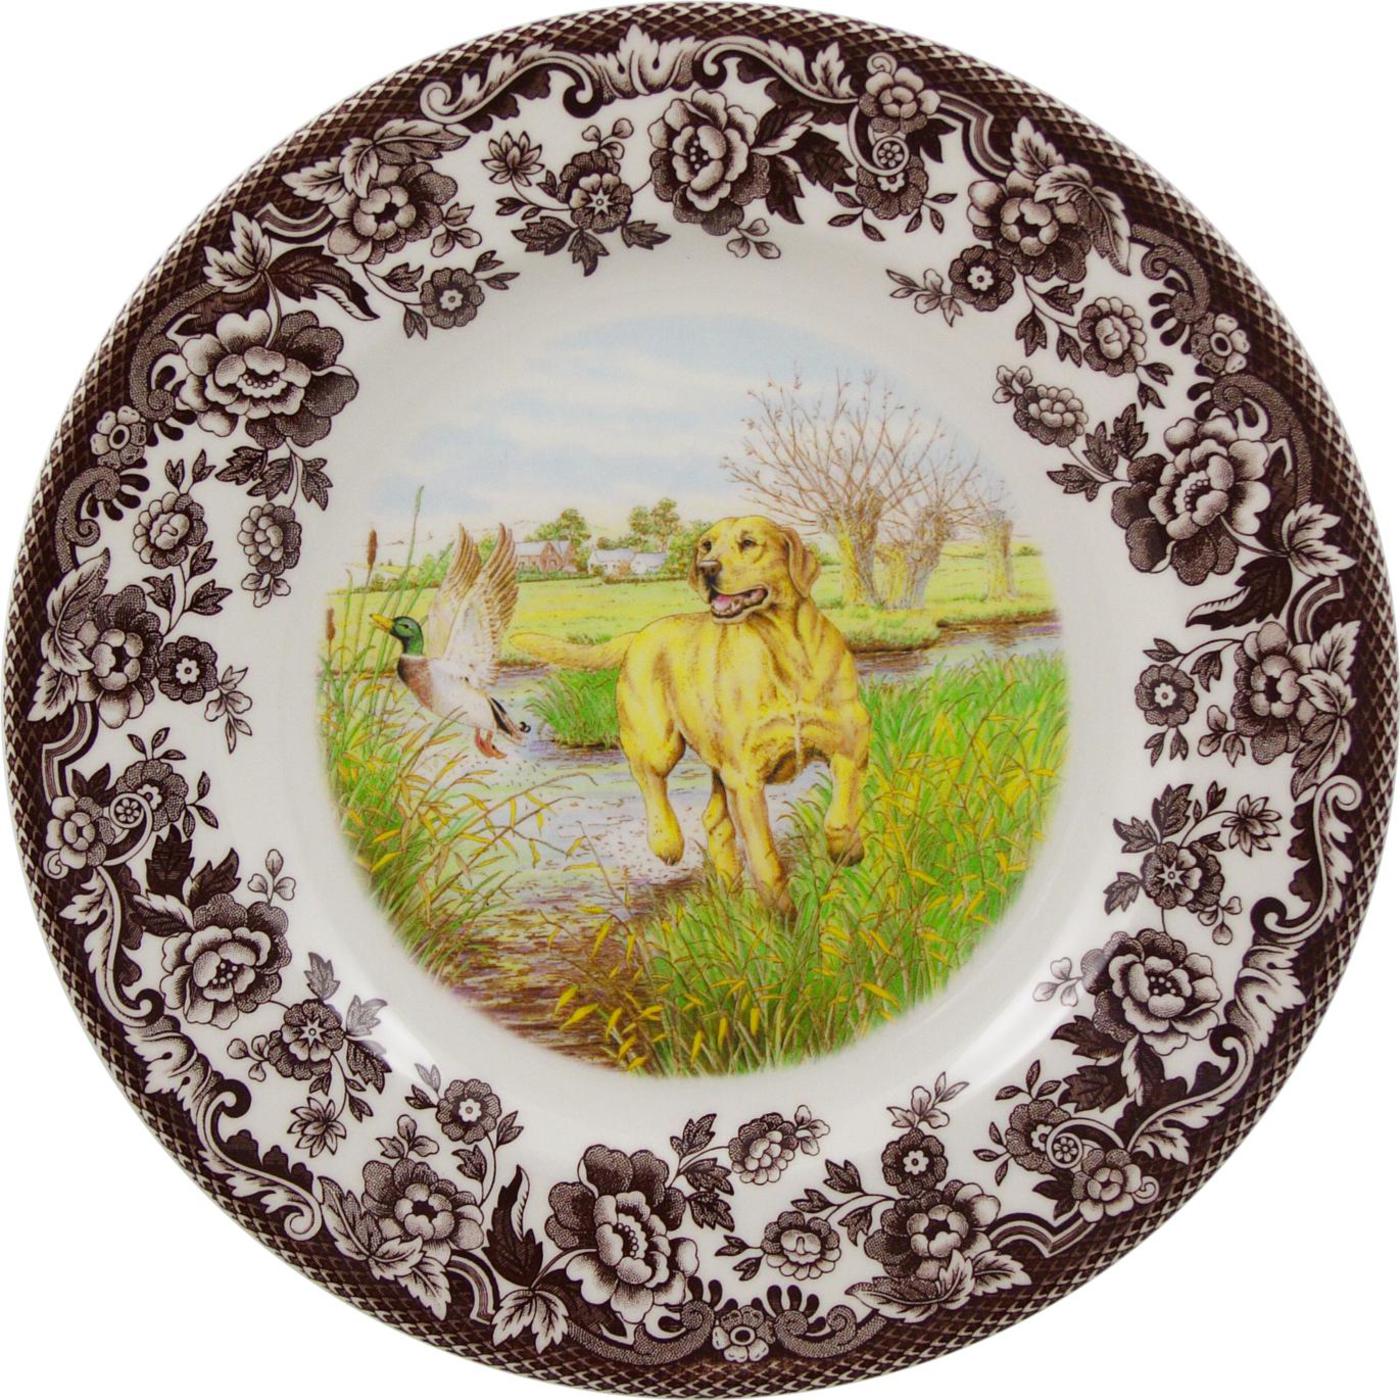 Woodland Salad Plate 8 Inch, Yellow Labrador Retriever image number null